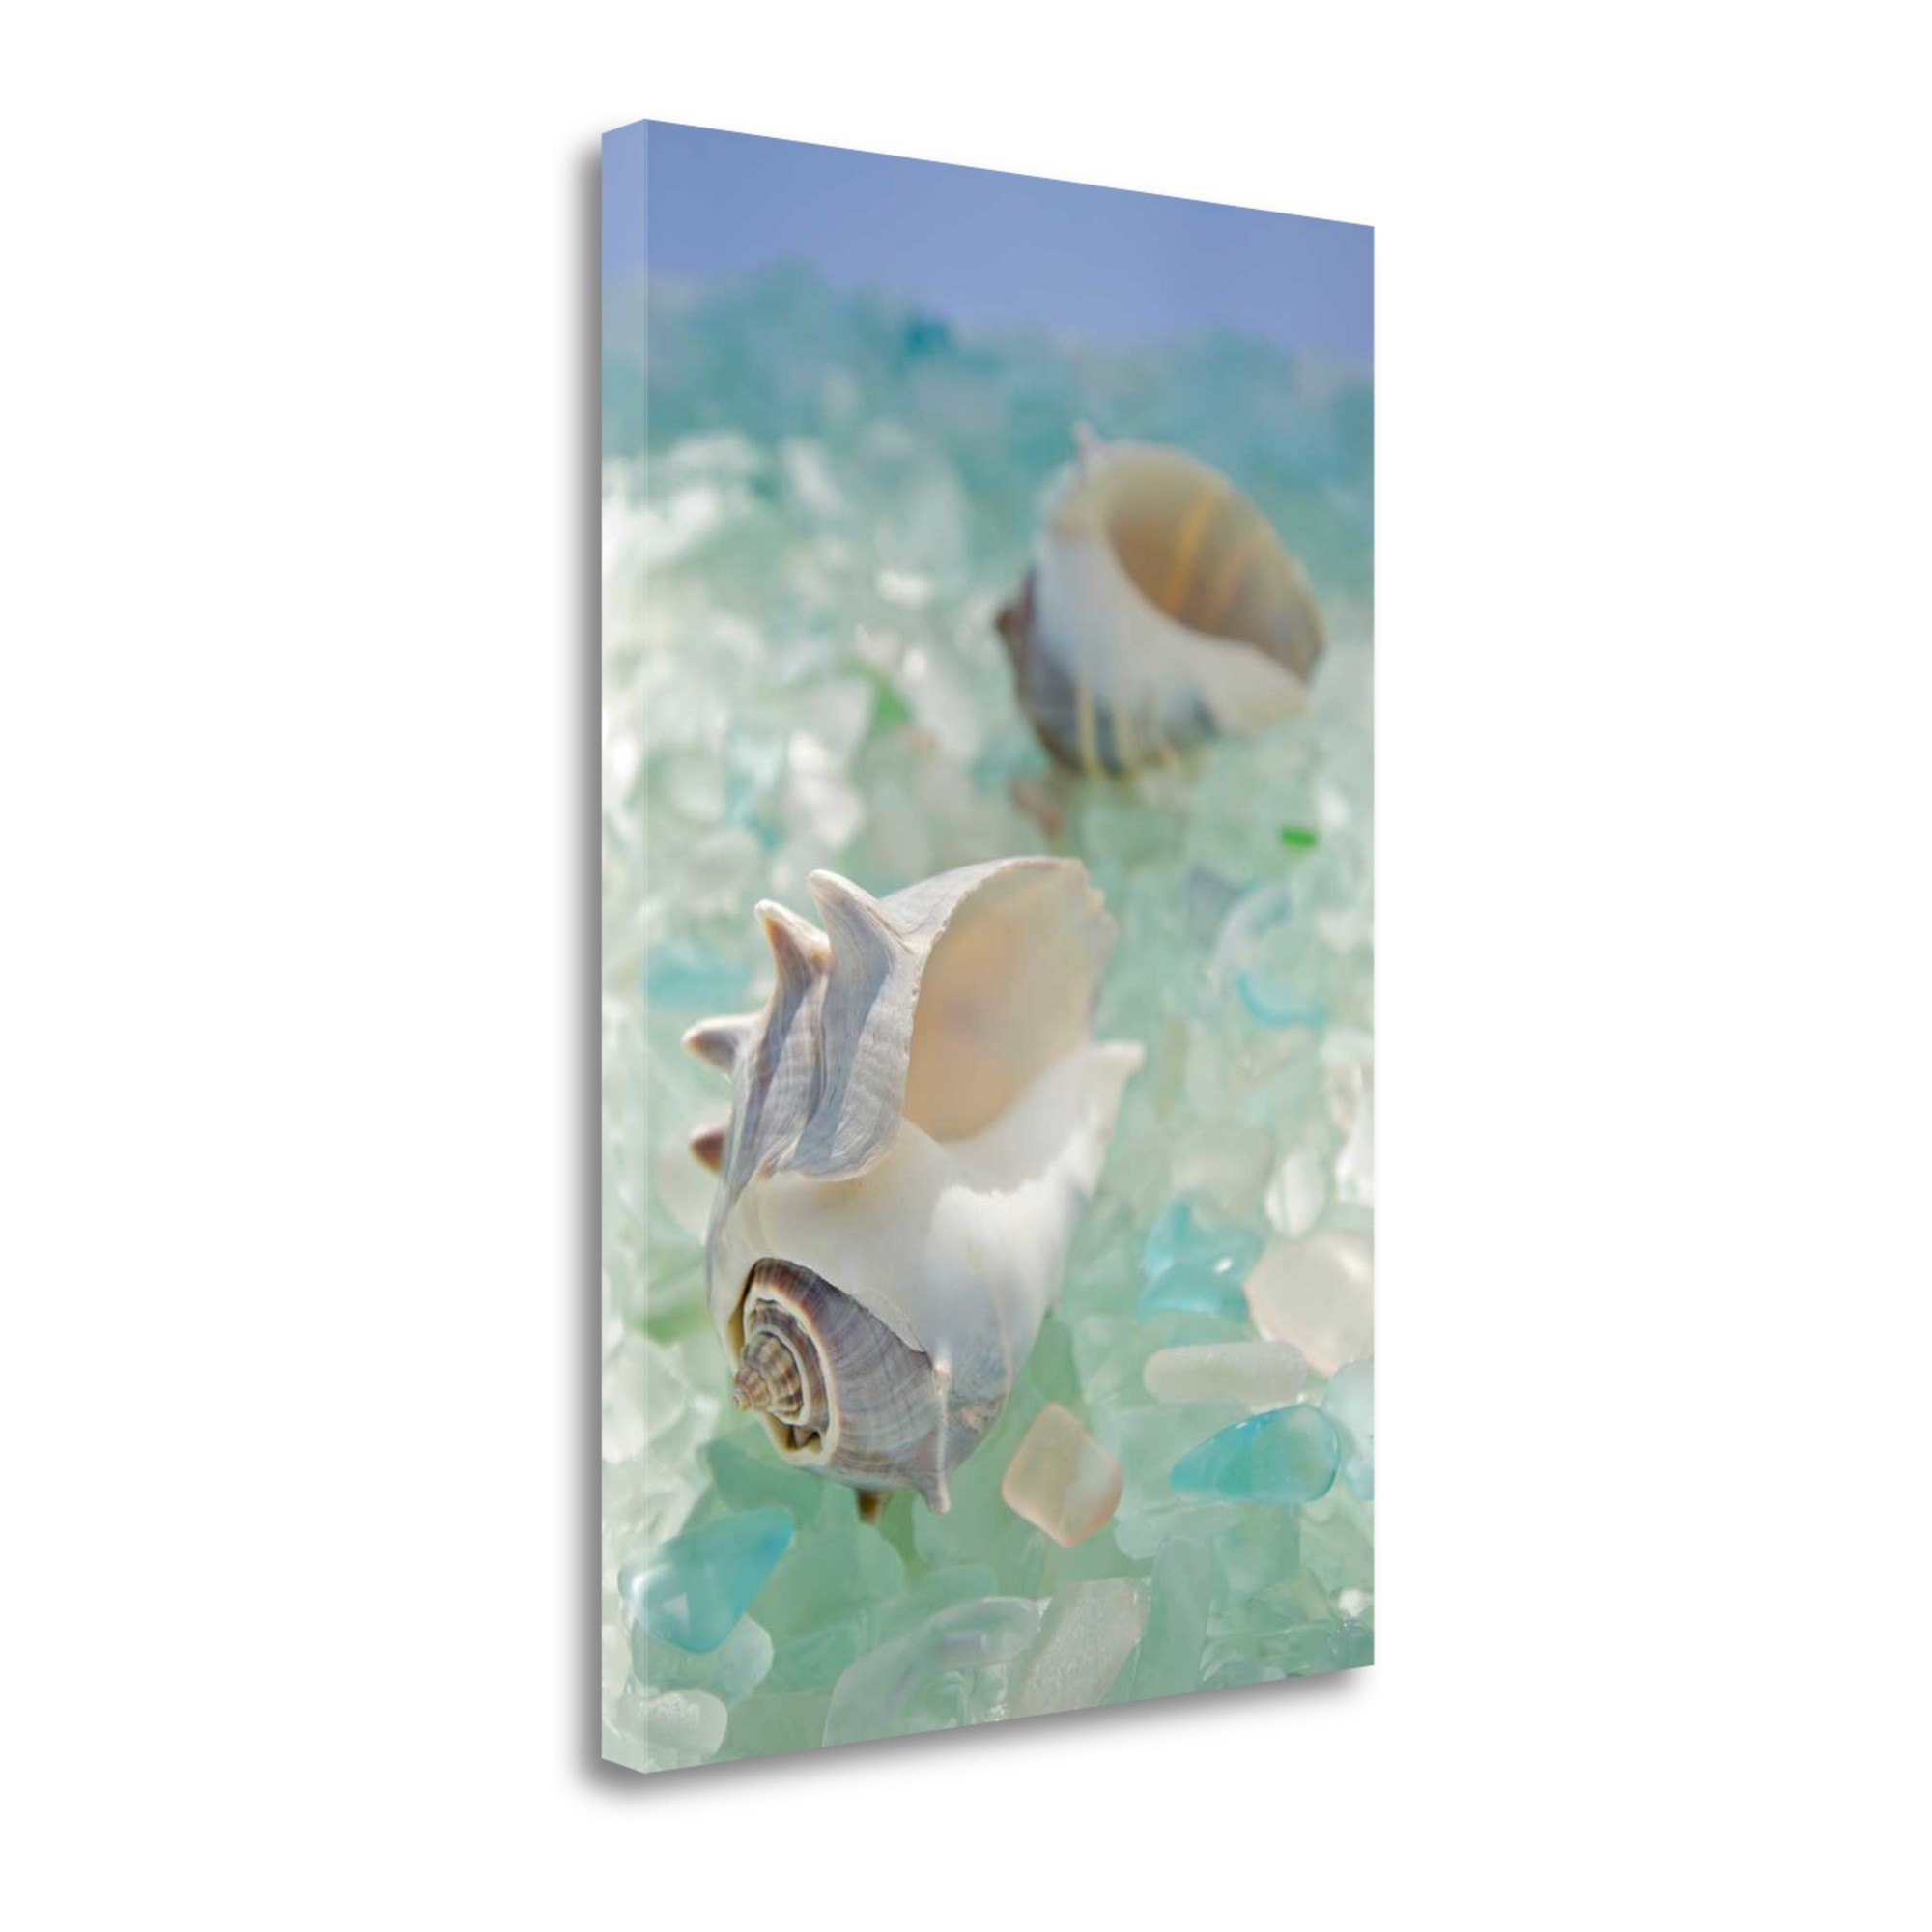 1" Conchshell and Seaglass Giclee Wrap Canvas Wall Art